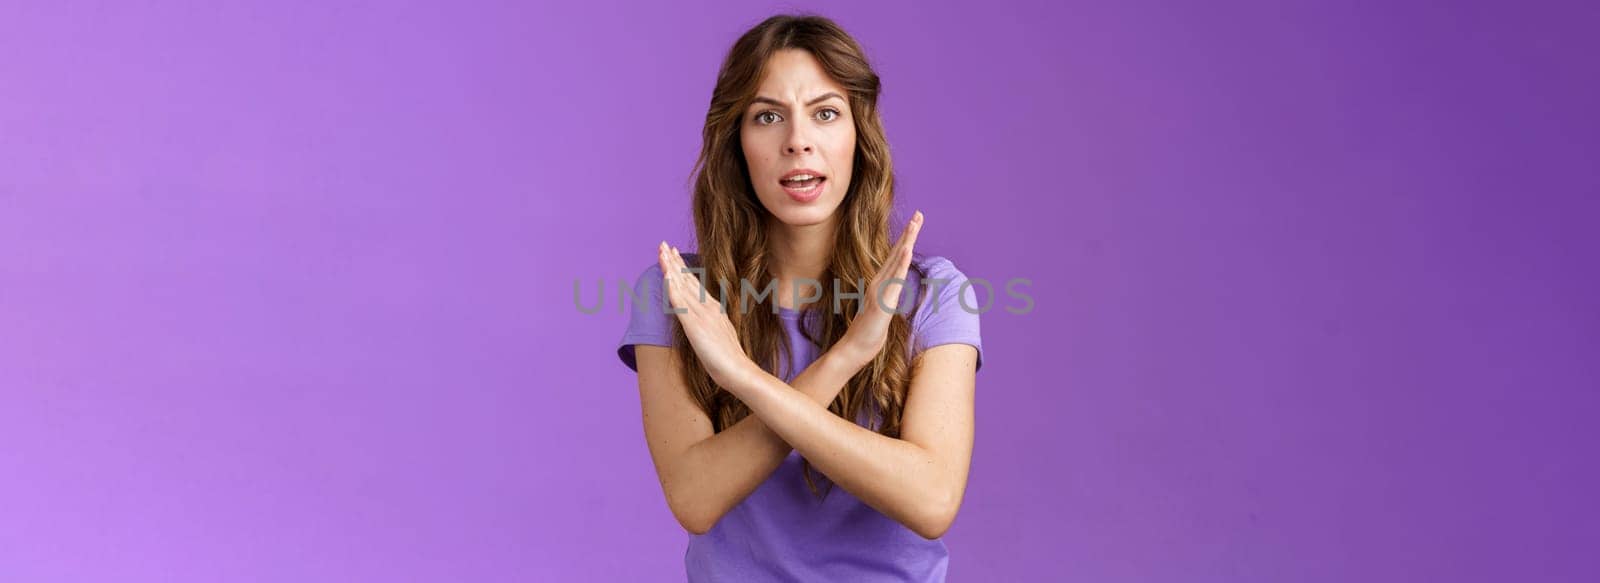 Quit fooling around. Serious-looking woman bad mood bossy angry make cross fighting lgbtq rights demand stop discrimination forbidding cruel behaviour say no purple background.